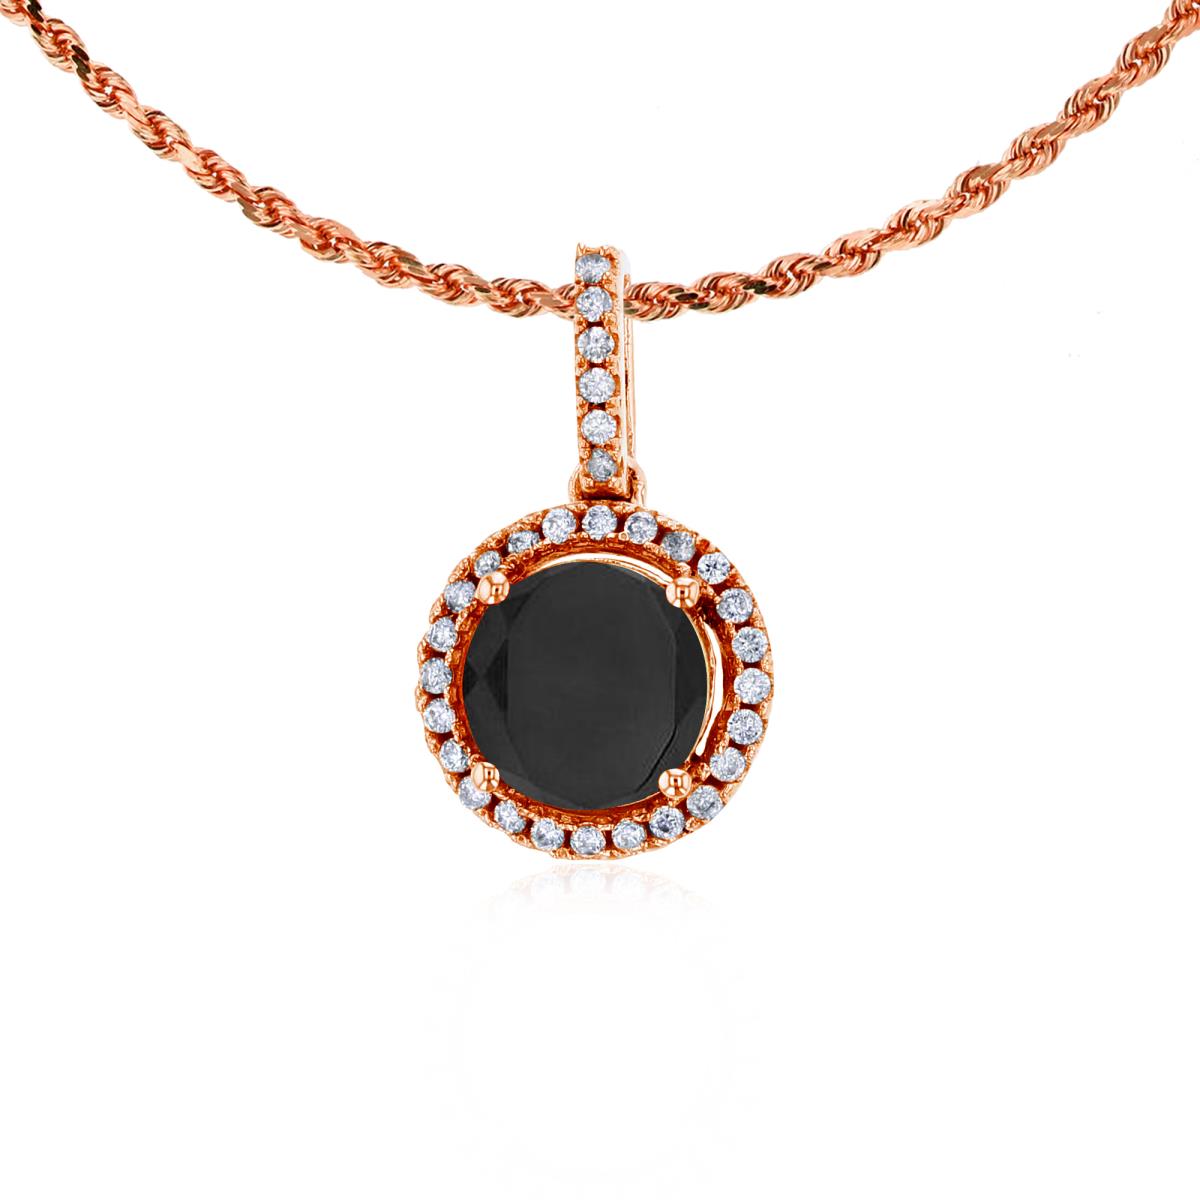 10K Rose Gold 7mm Round Onyx & 0.15 CTTW Round Diamonds Halo 18" Rope Chain Necklace